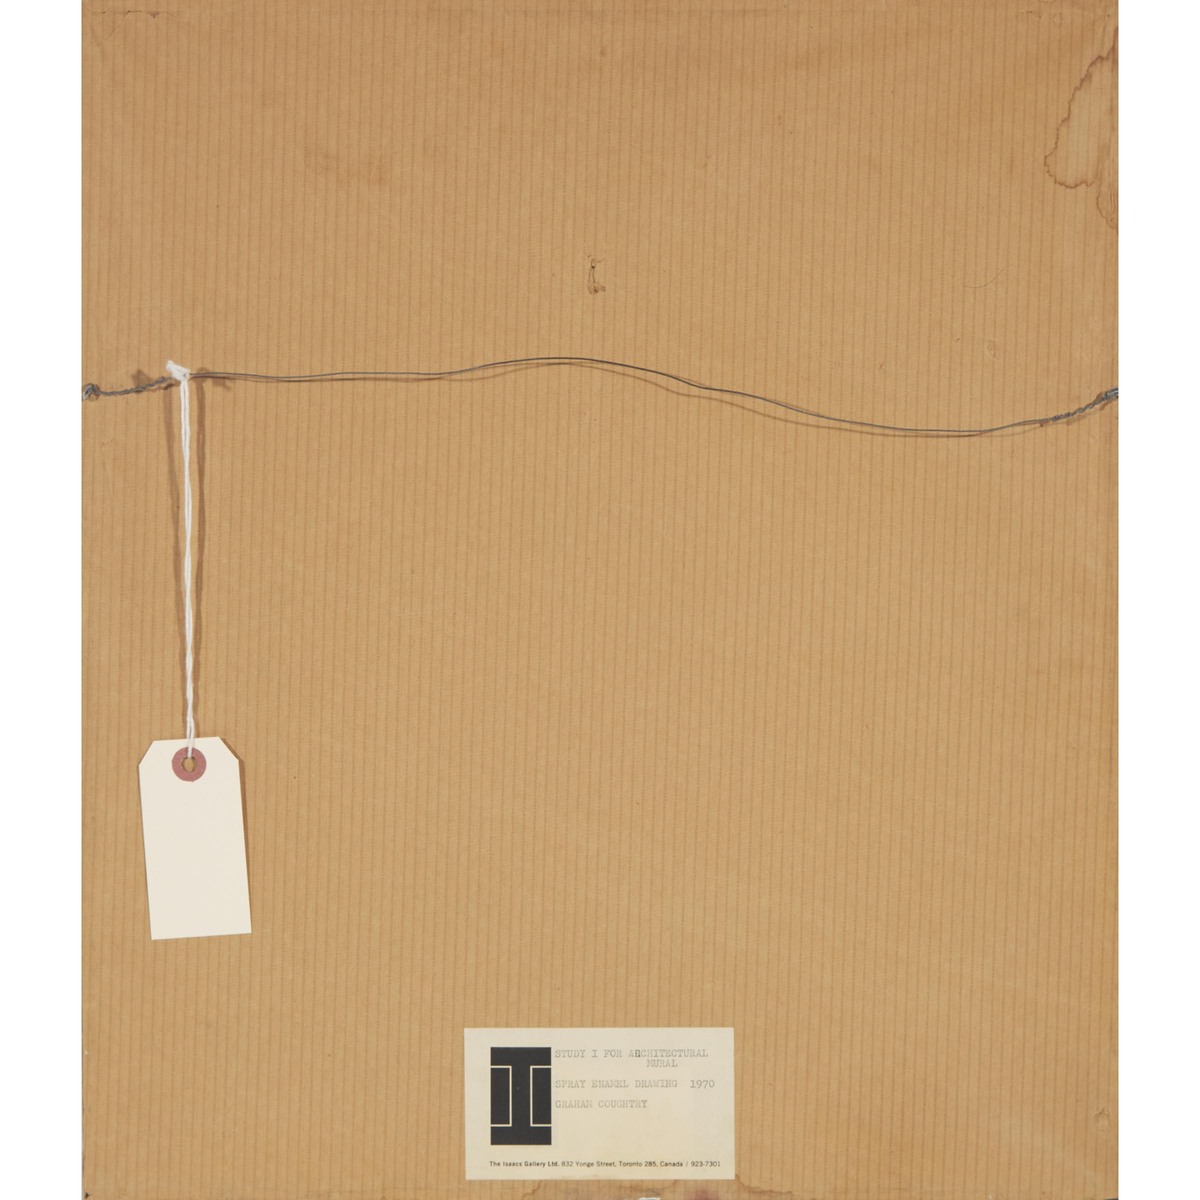 John Graham Coughtry (1931-1999), STUDY I FOR ARCHITECTURAL MURAL, 1970, sight 12.5 x 10.5 in — 31.8 - Image 4 of 5